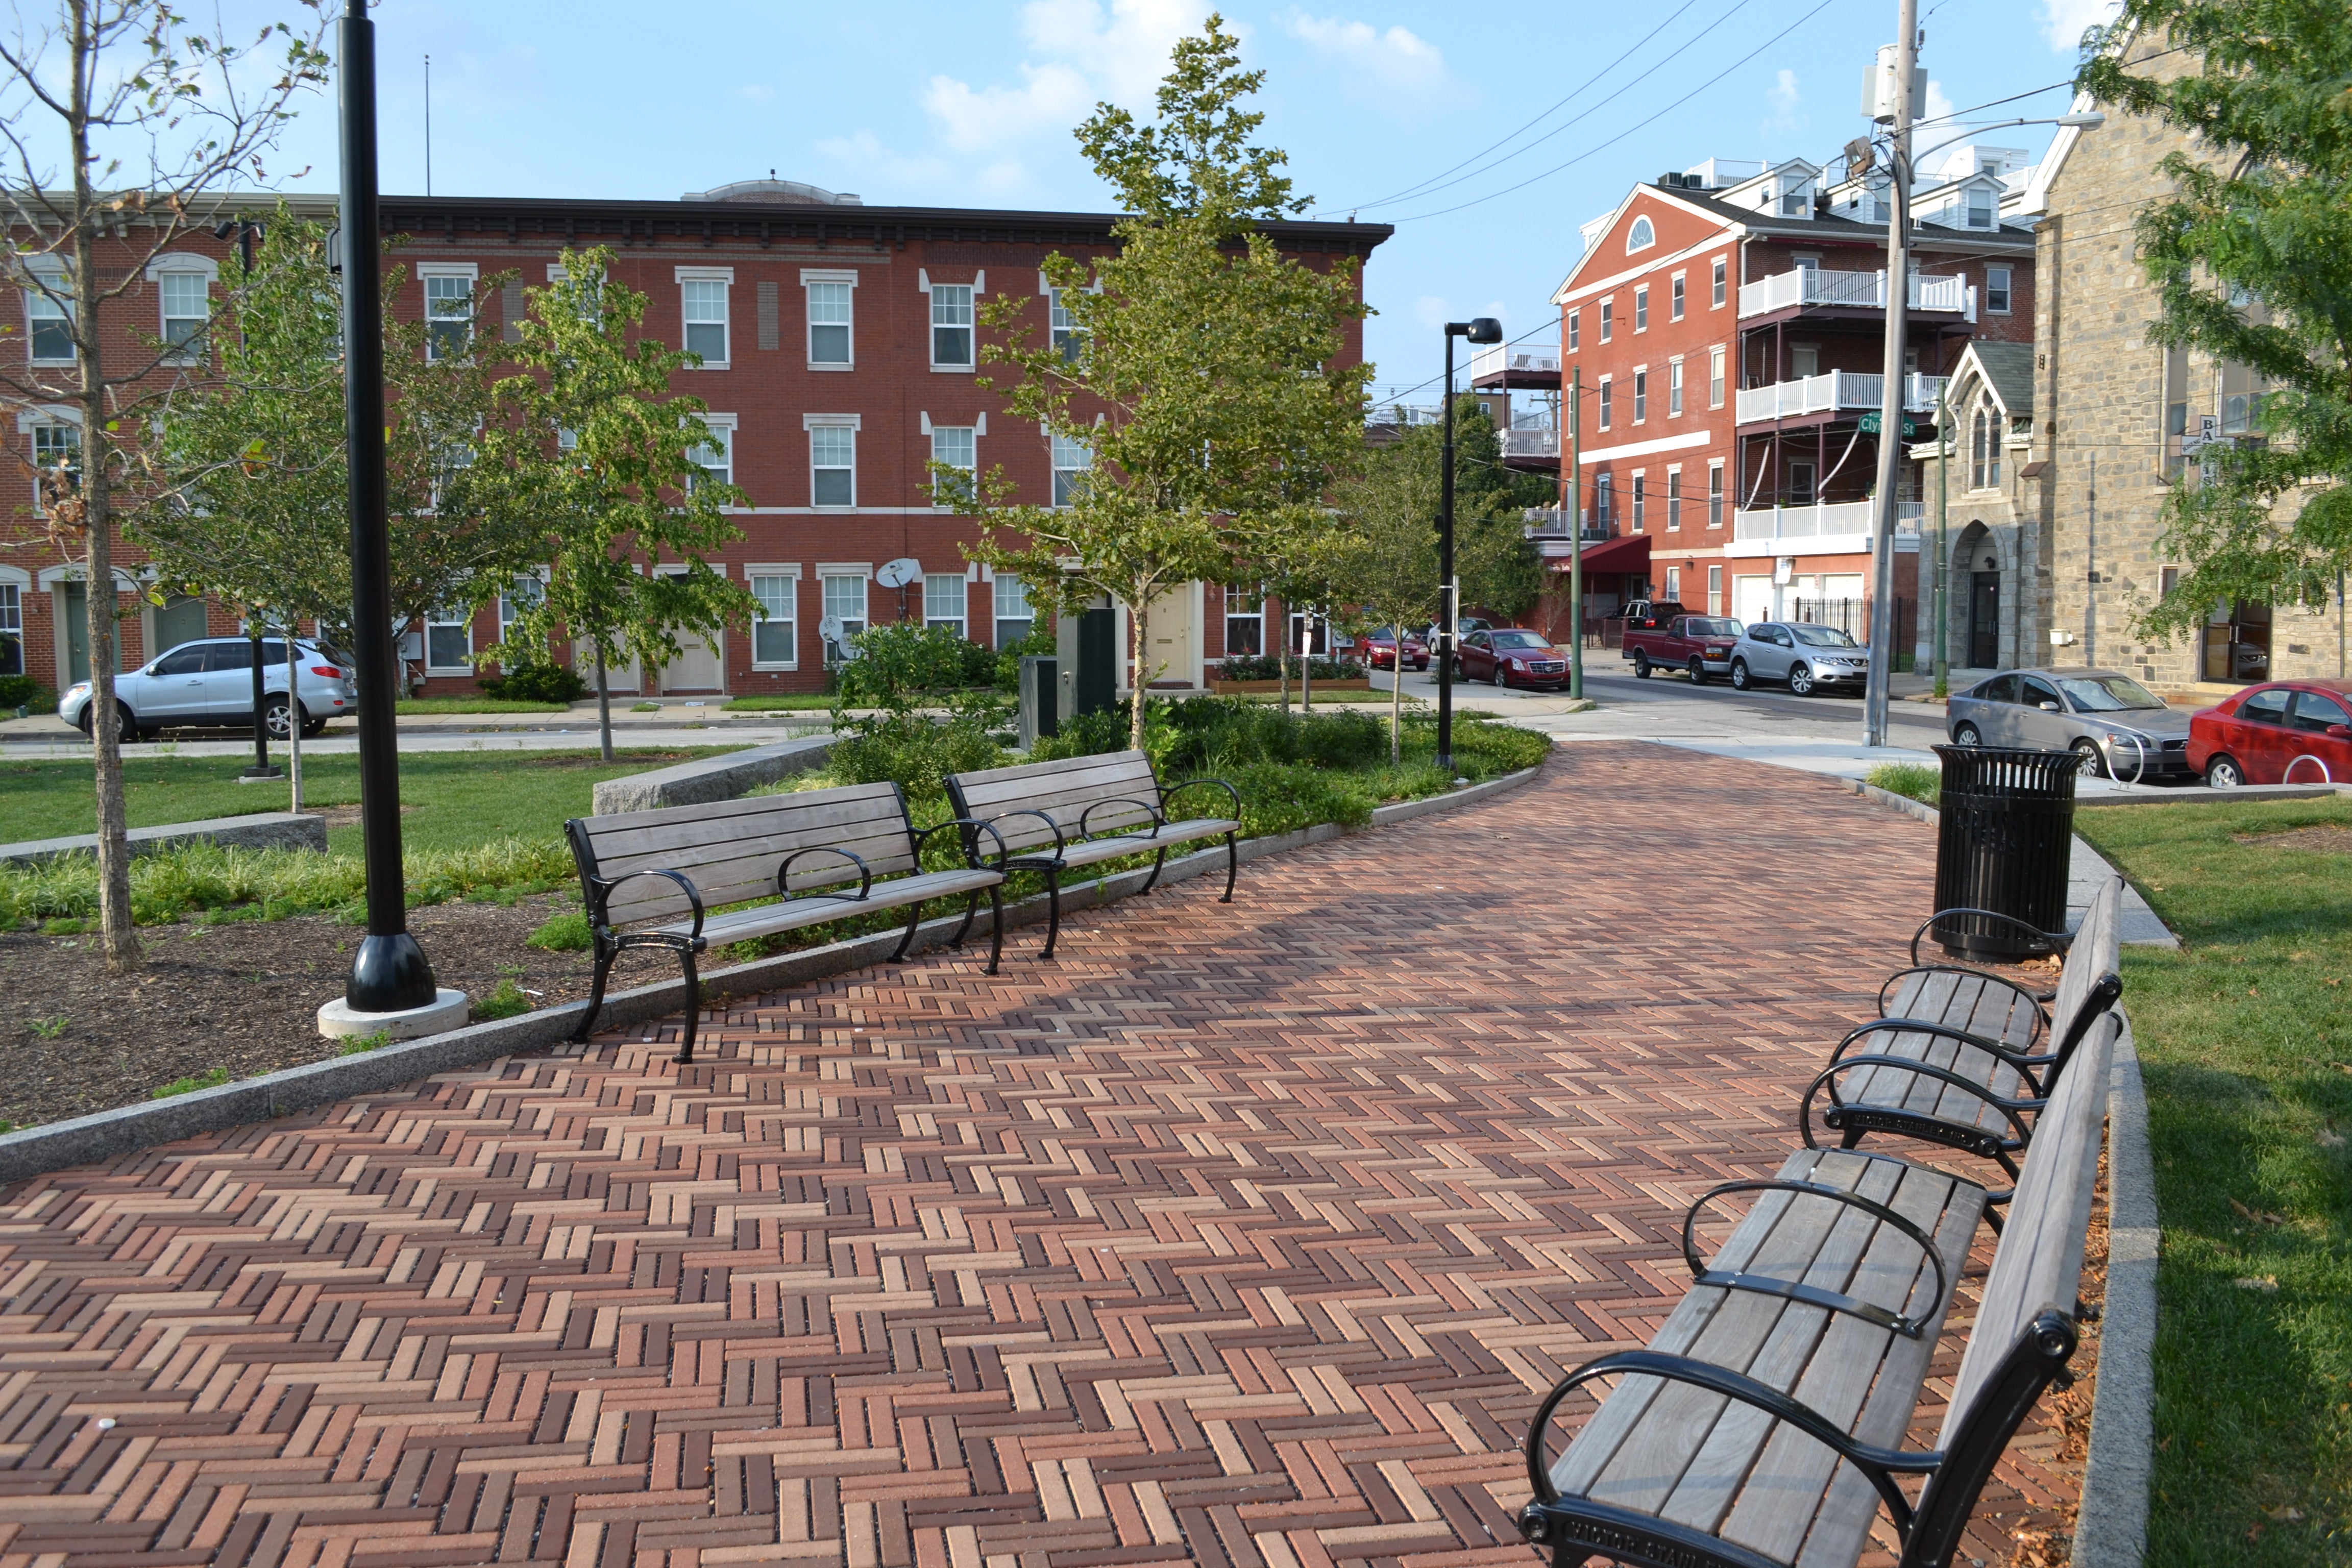 The zig-zagged brick pattern catches your eye as you enter the park through one of many access points